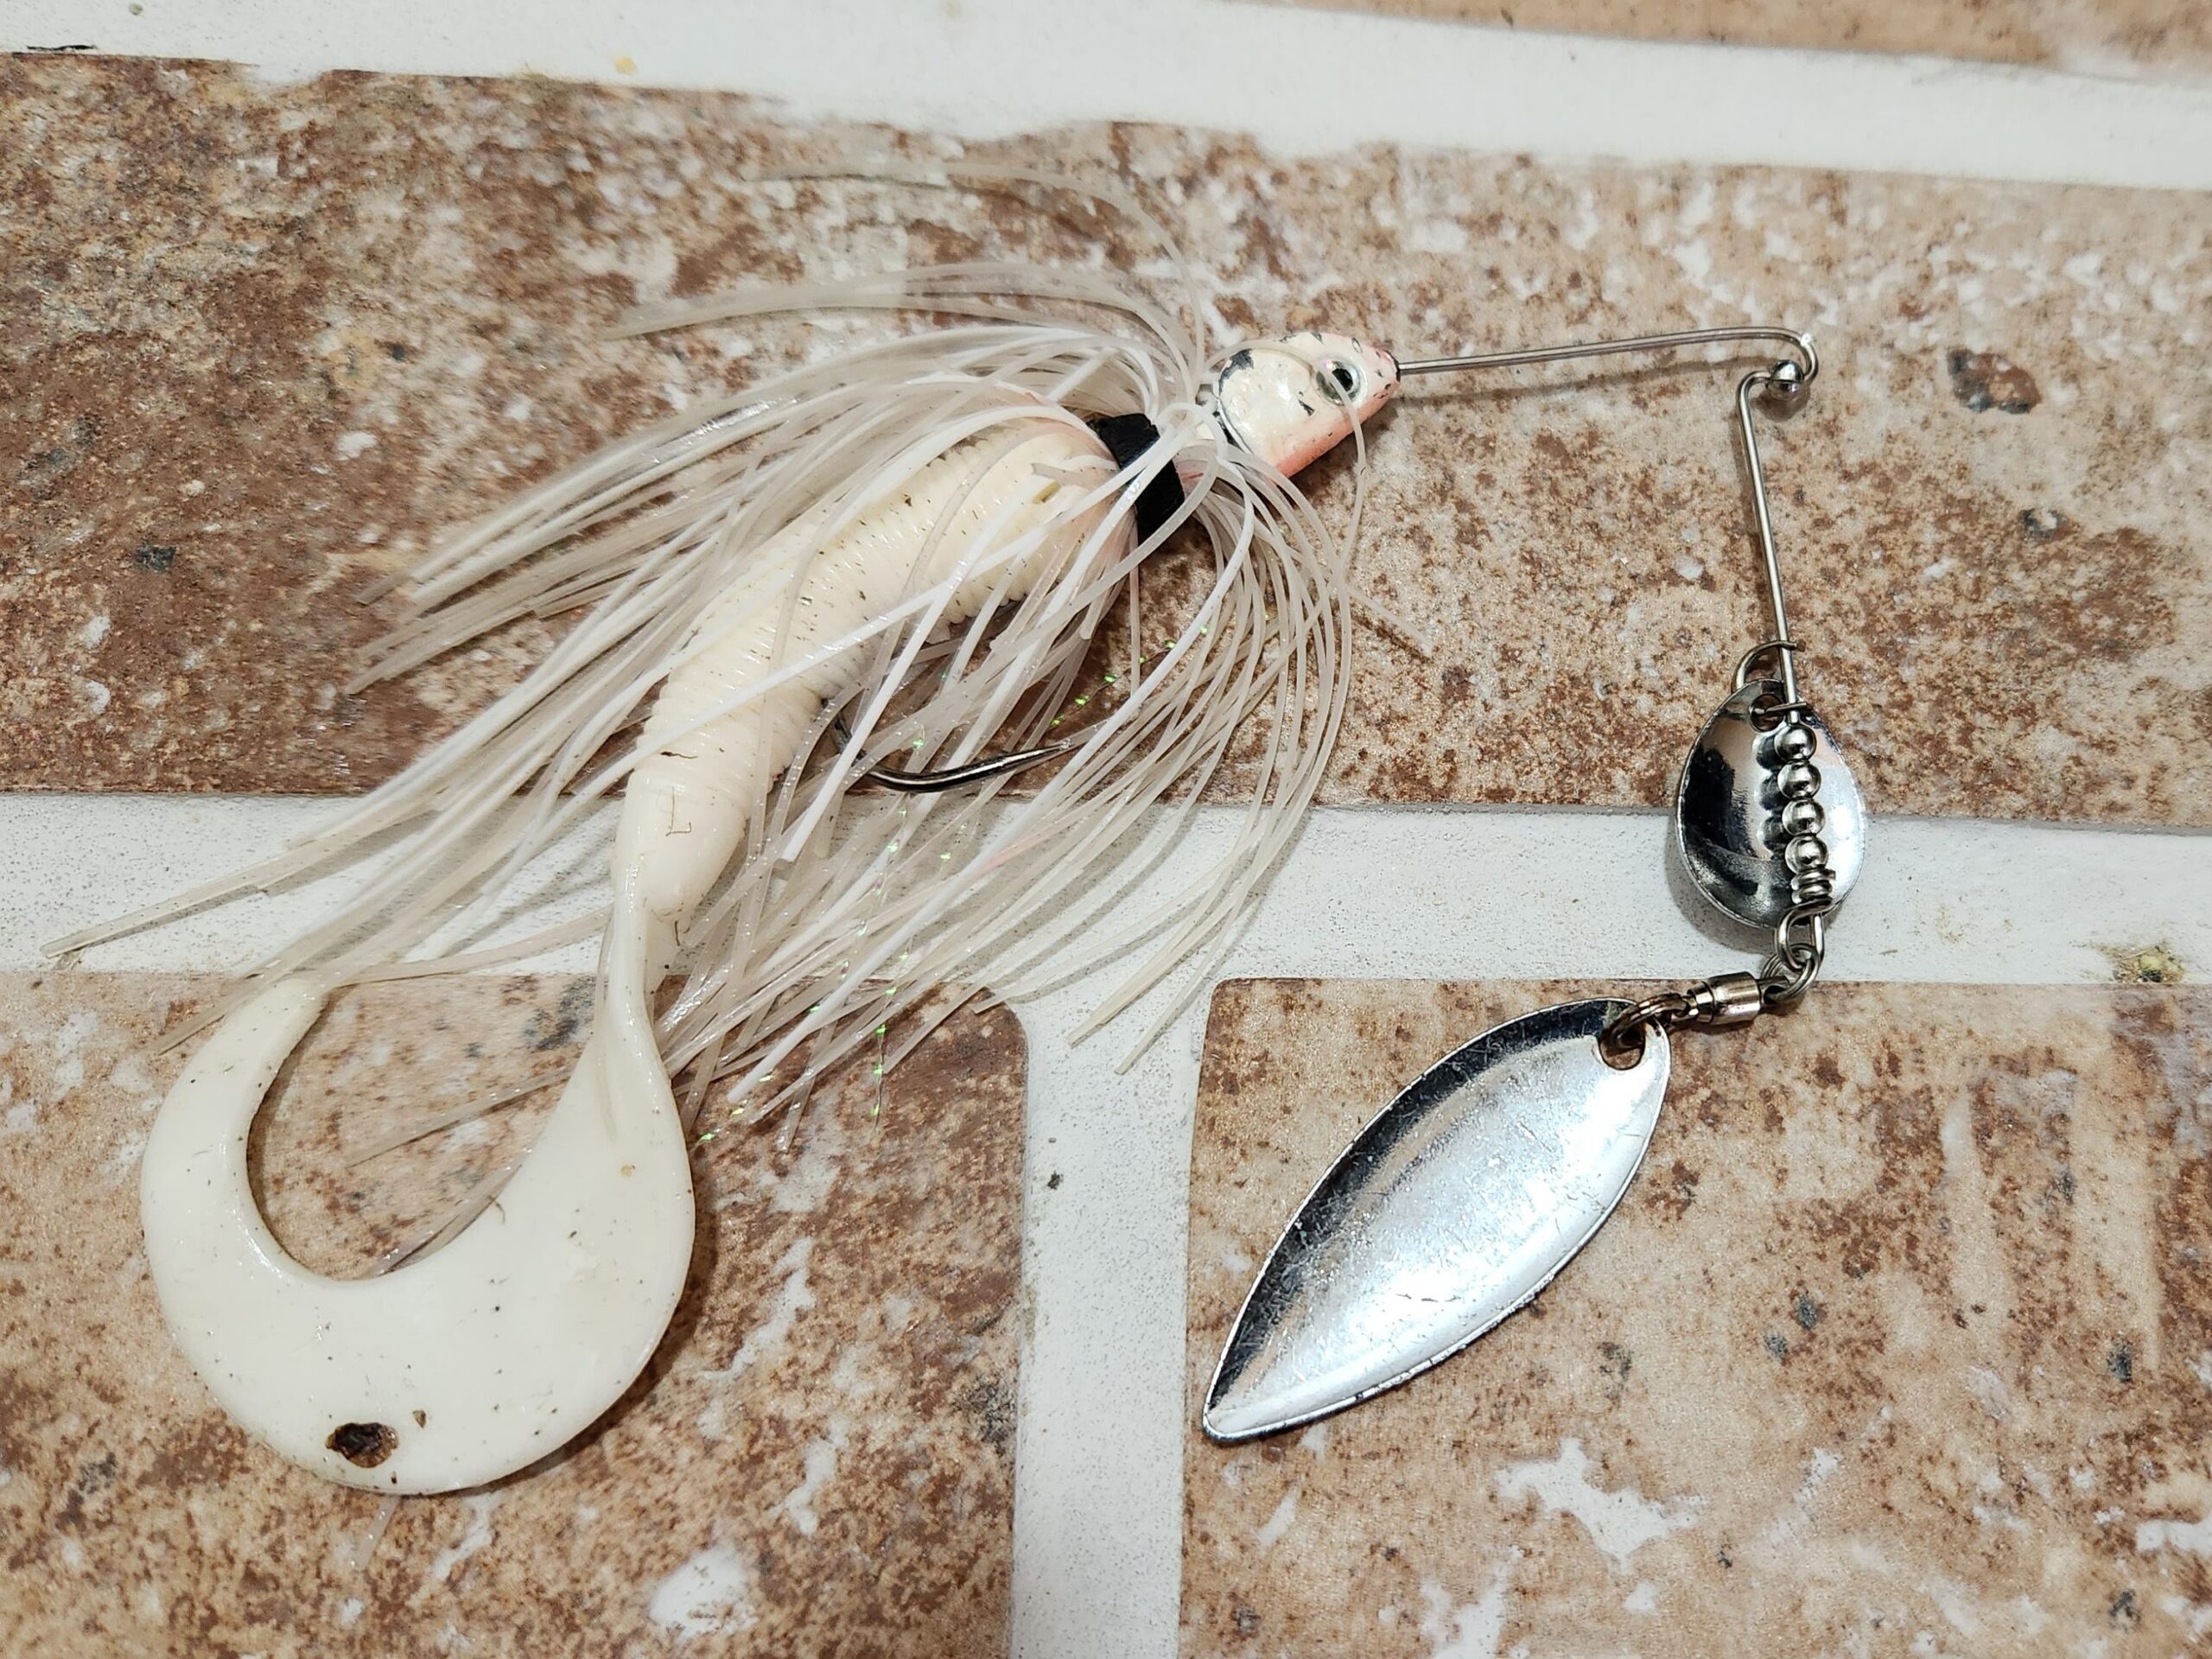 spinnerbait, the perfect lure for pike. 2nd most popular lure among Quebecers for pike fishing.